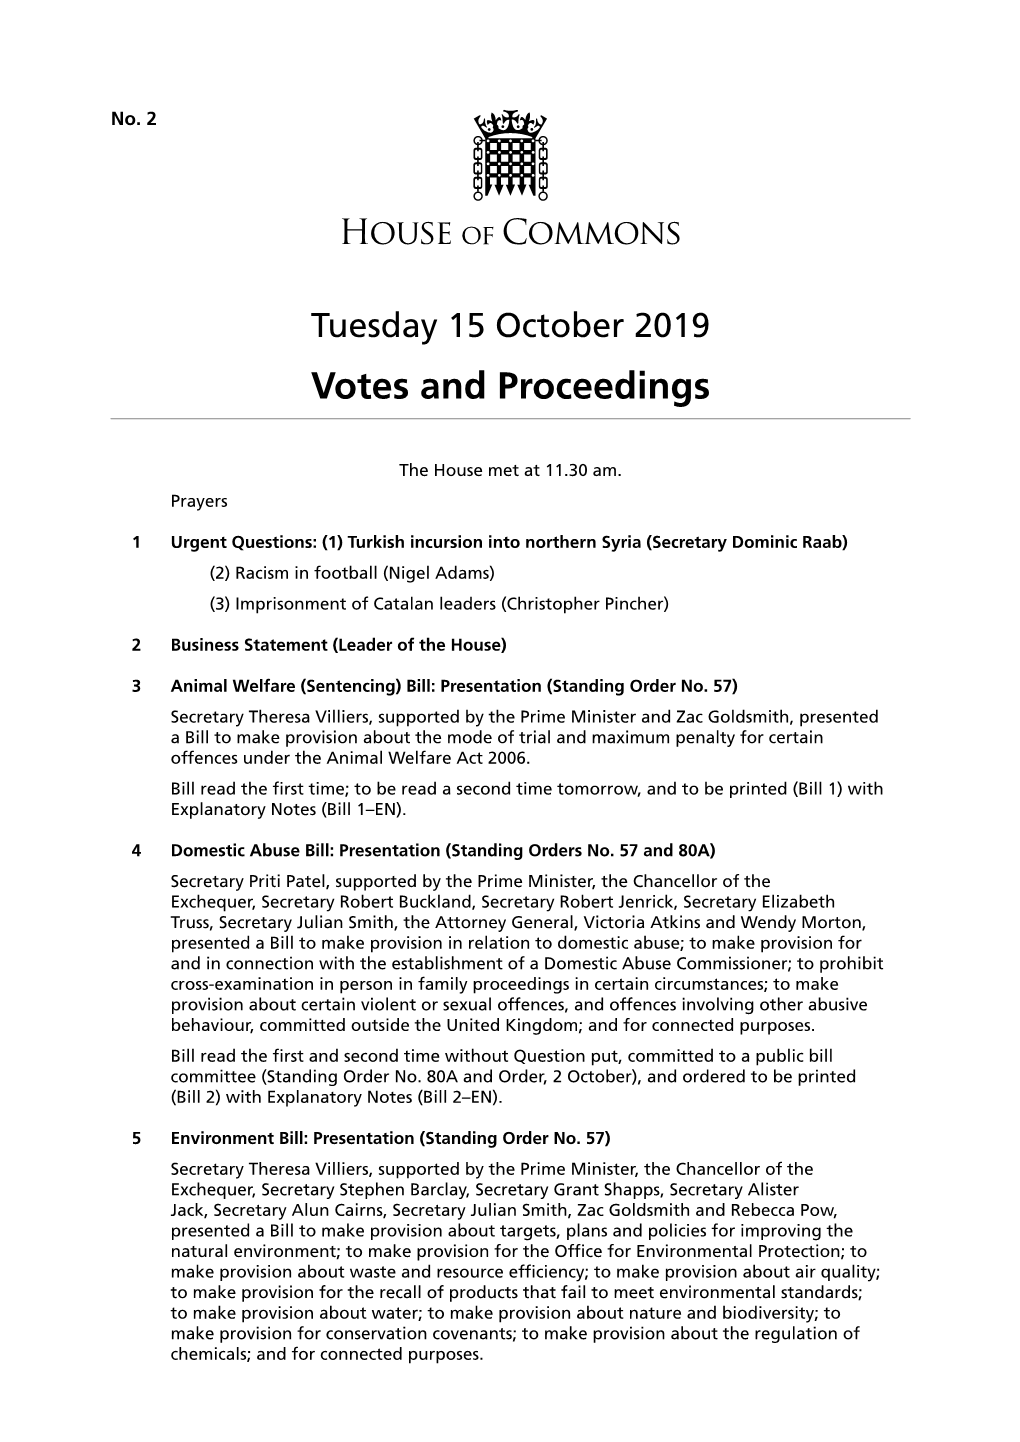 Votes and Proceedings for 15 Oct 2019